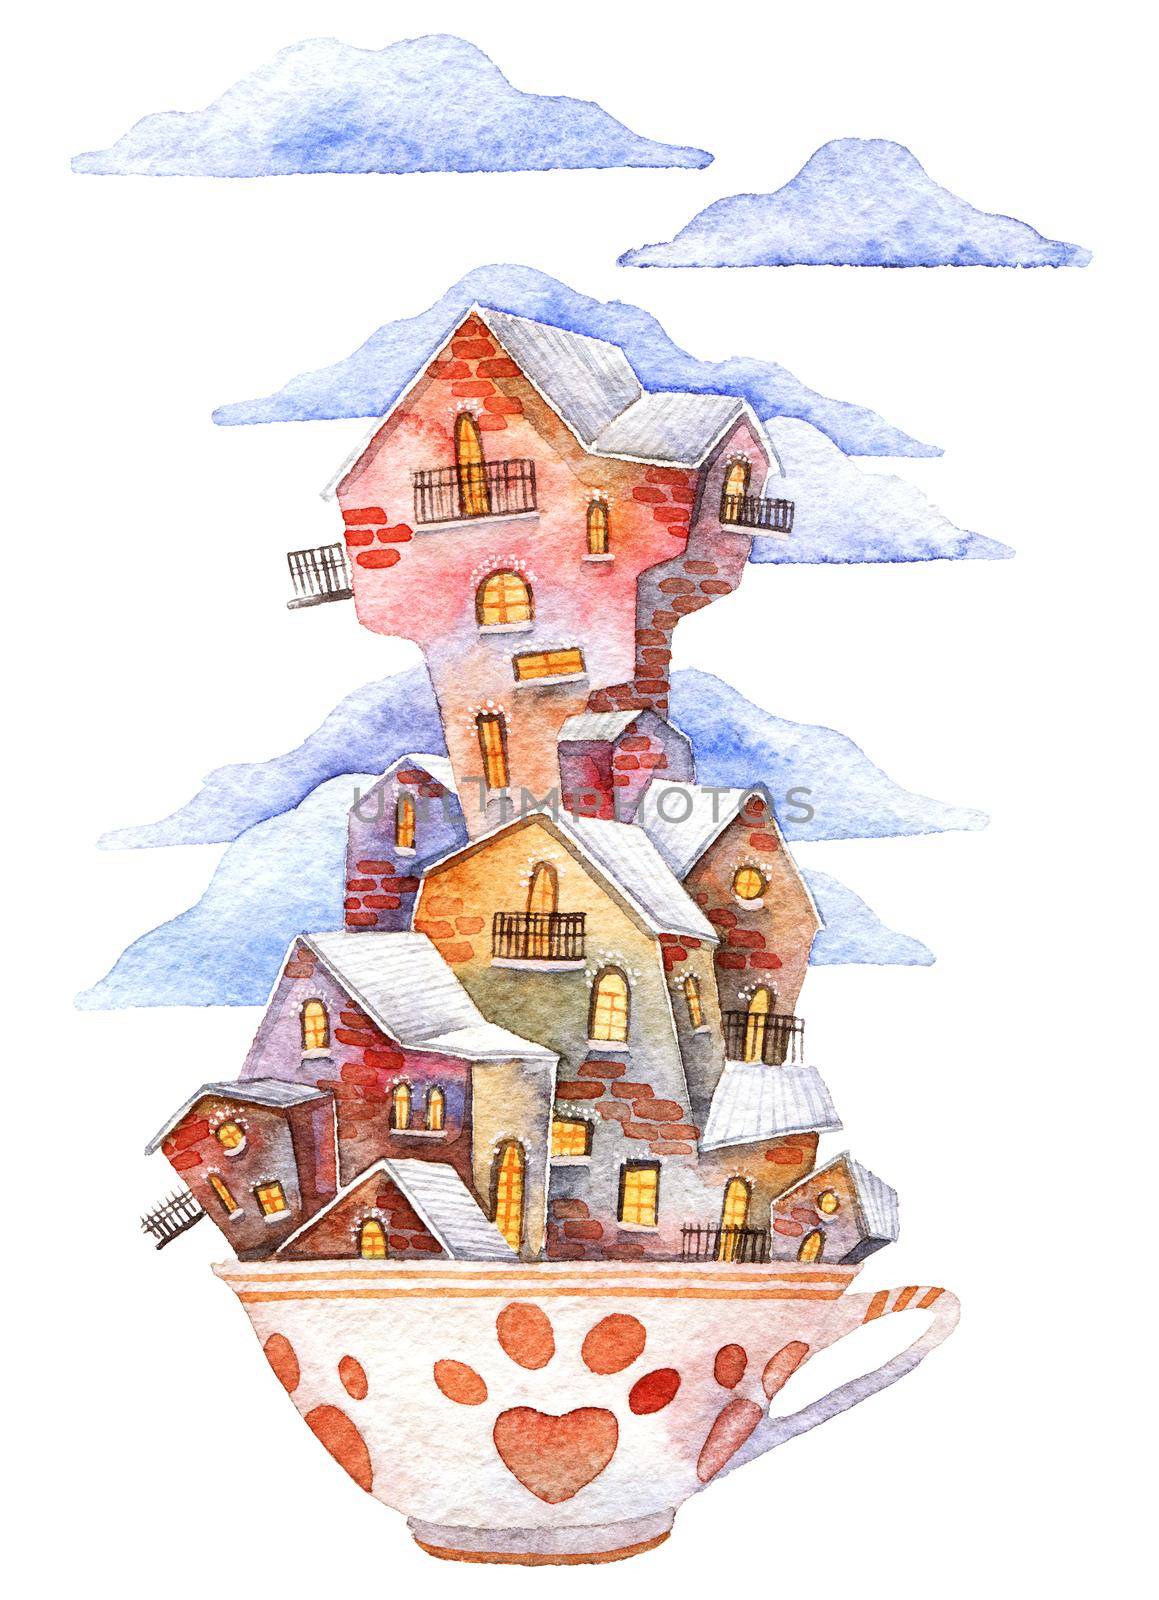 Watercolor illustration of cute little houses in a coffee mug with a footprint. White background with clouds.